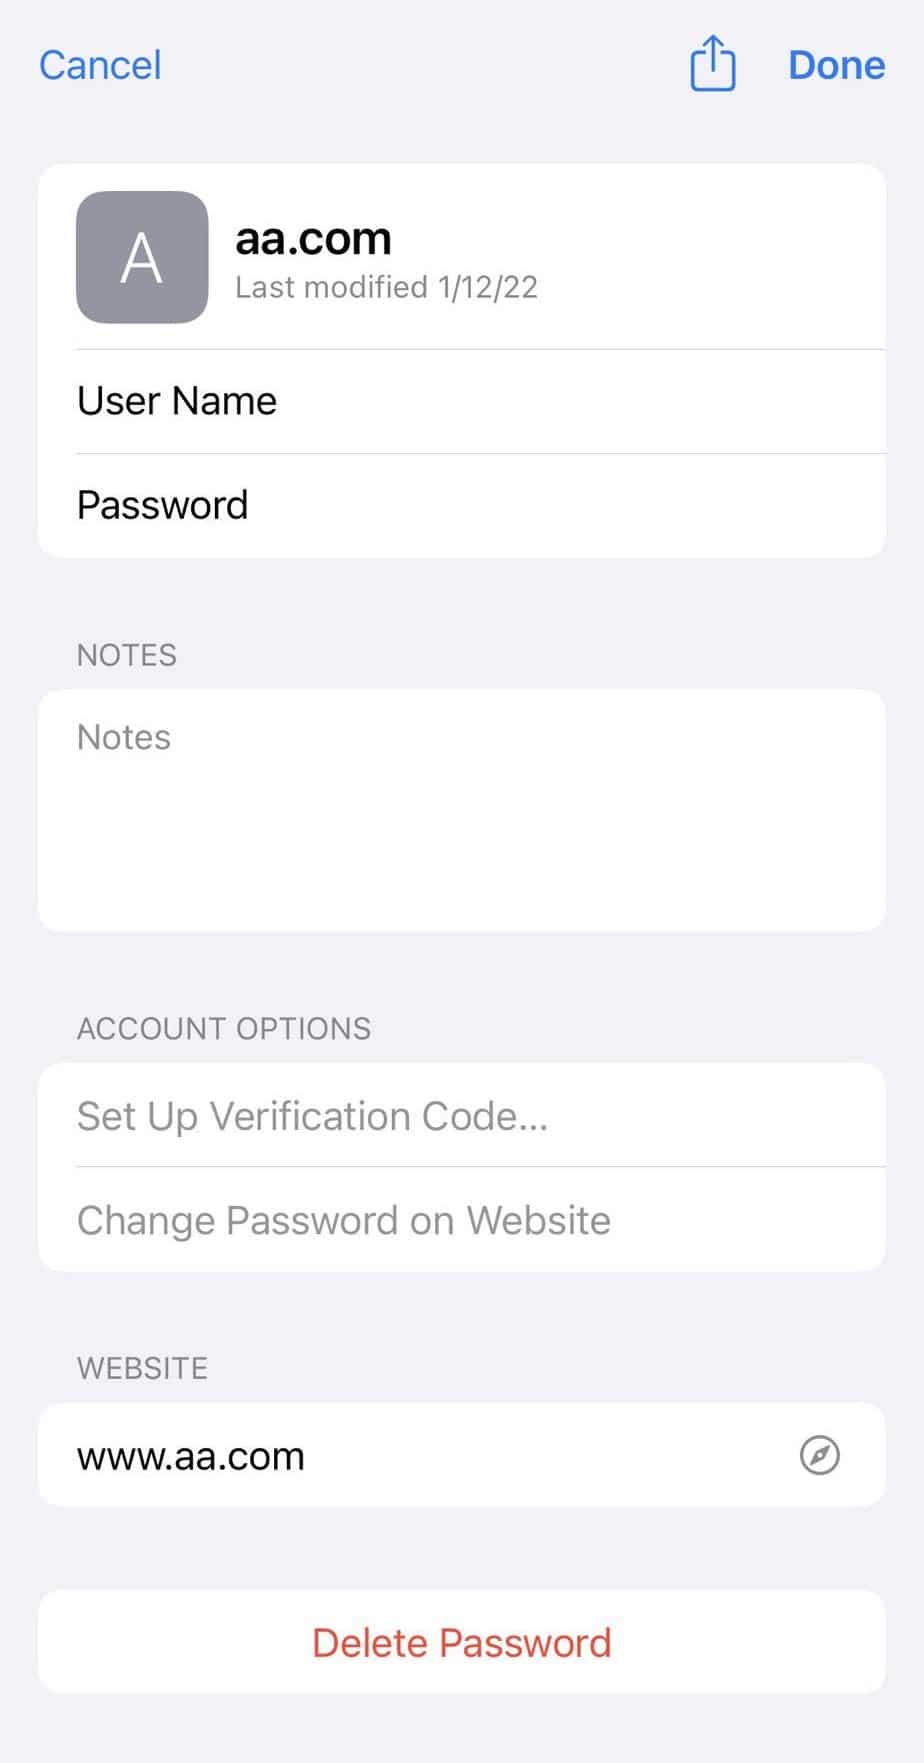 notes-in-icloud-keychain